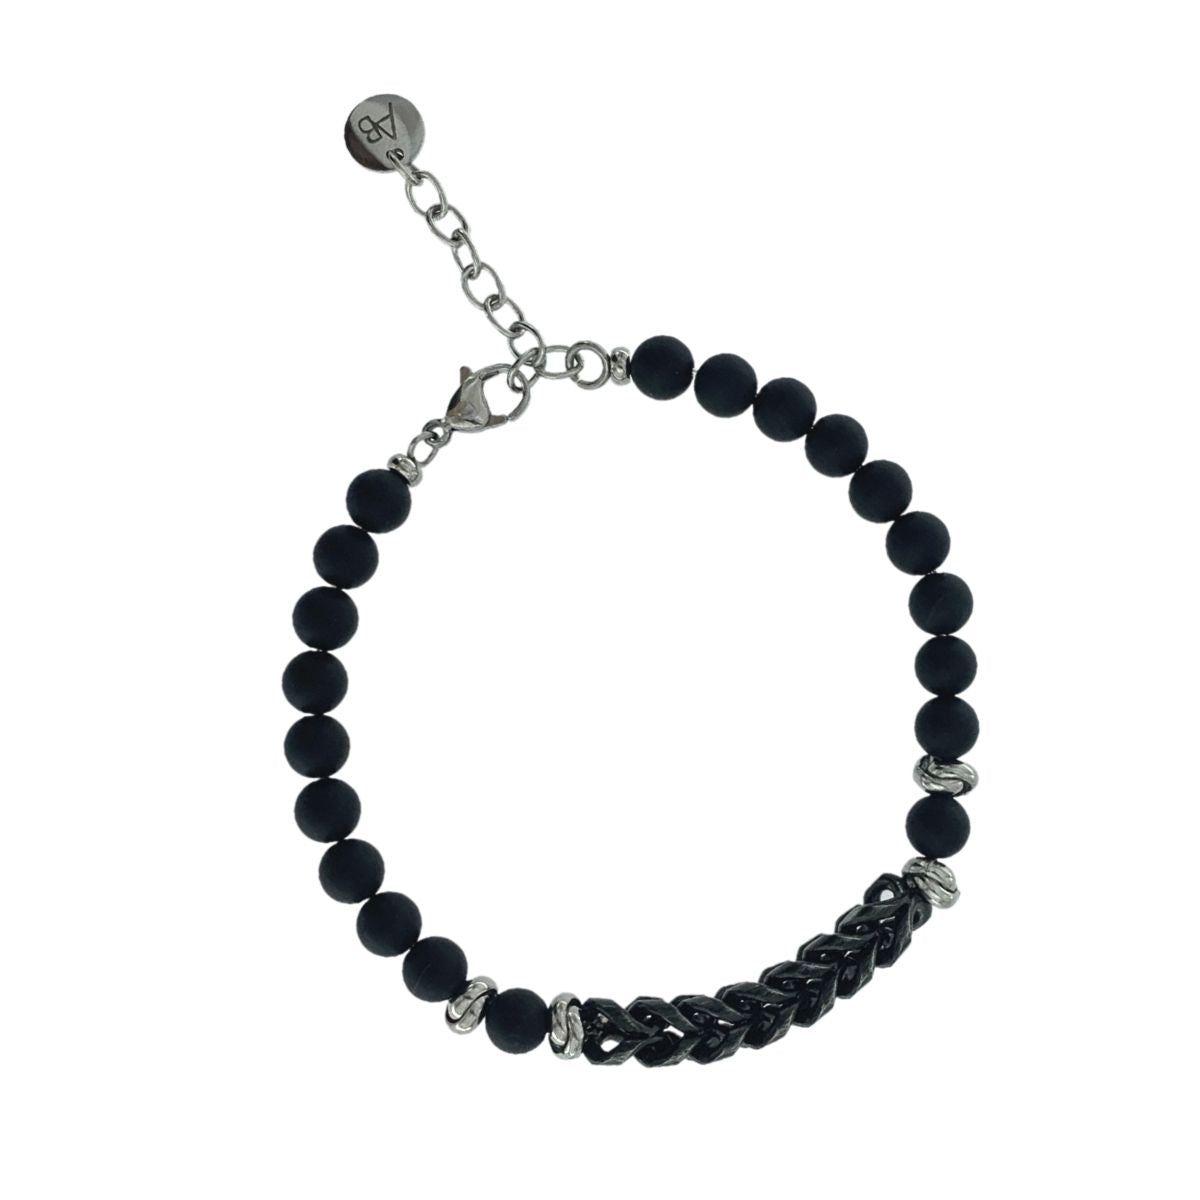 COMBINED STEEL AND ONYX BRACELET